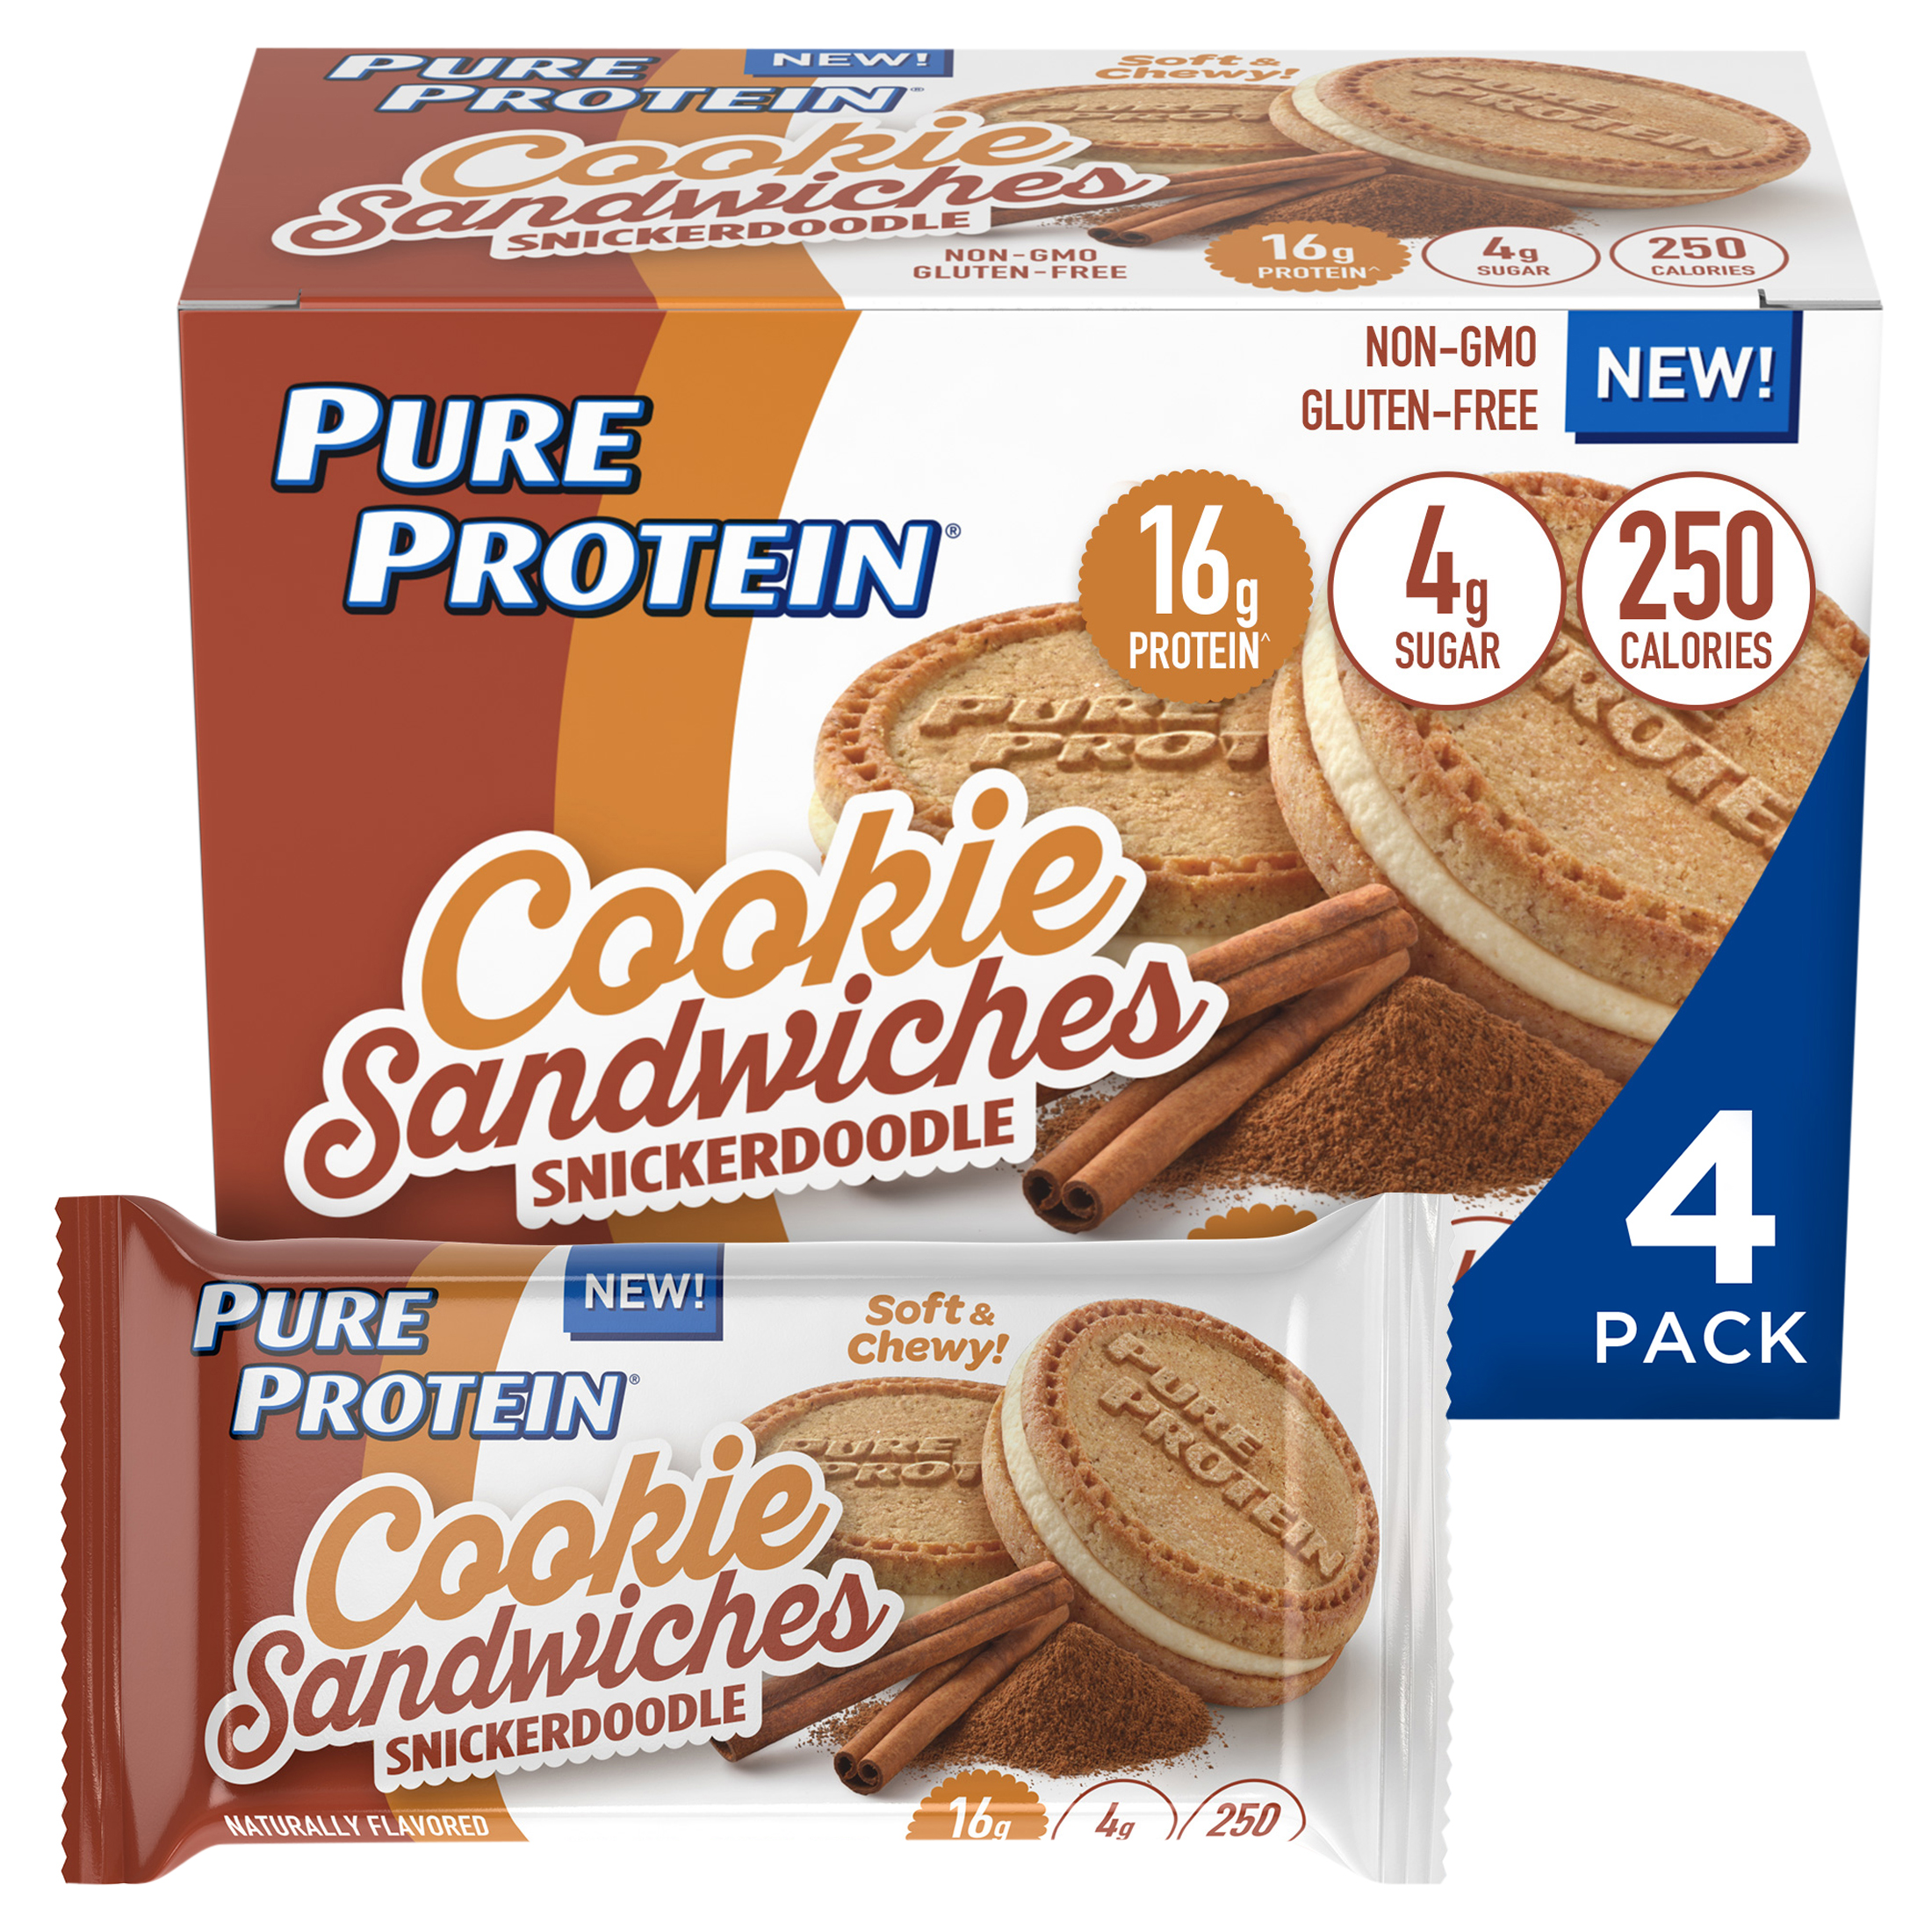 Pure Protein Cookie Sandwiches, Snickerdoodle, 16g Protein, 4 Ct - image 1 of 8